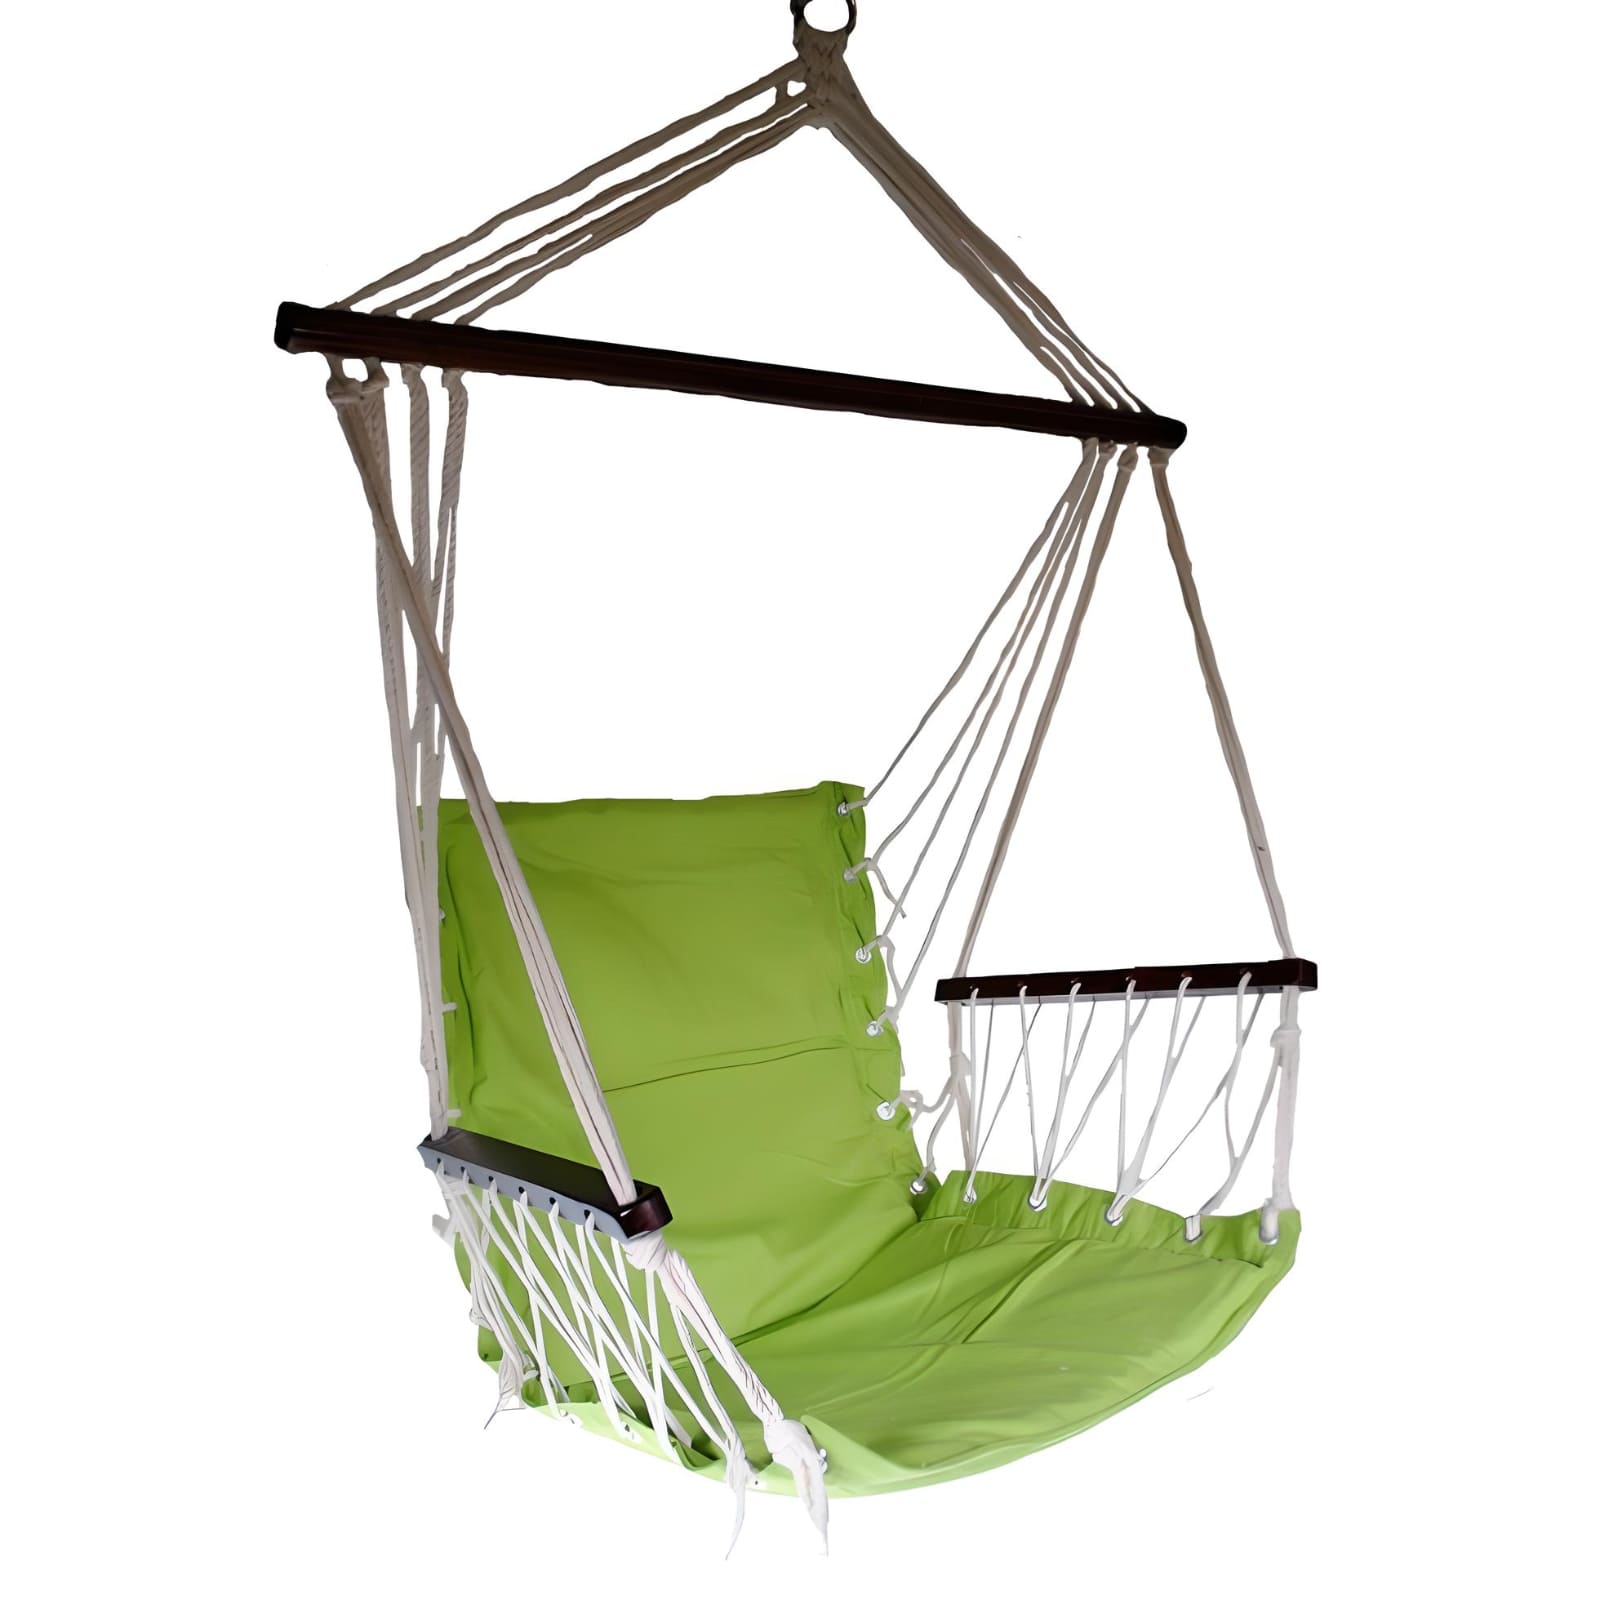 green-in-color-hanging-hammock-chair-with-wooden-arm-rests